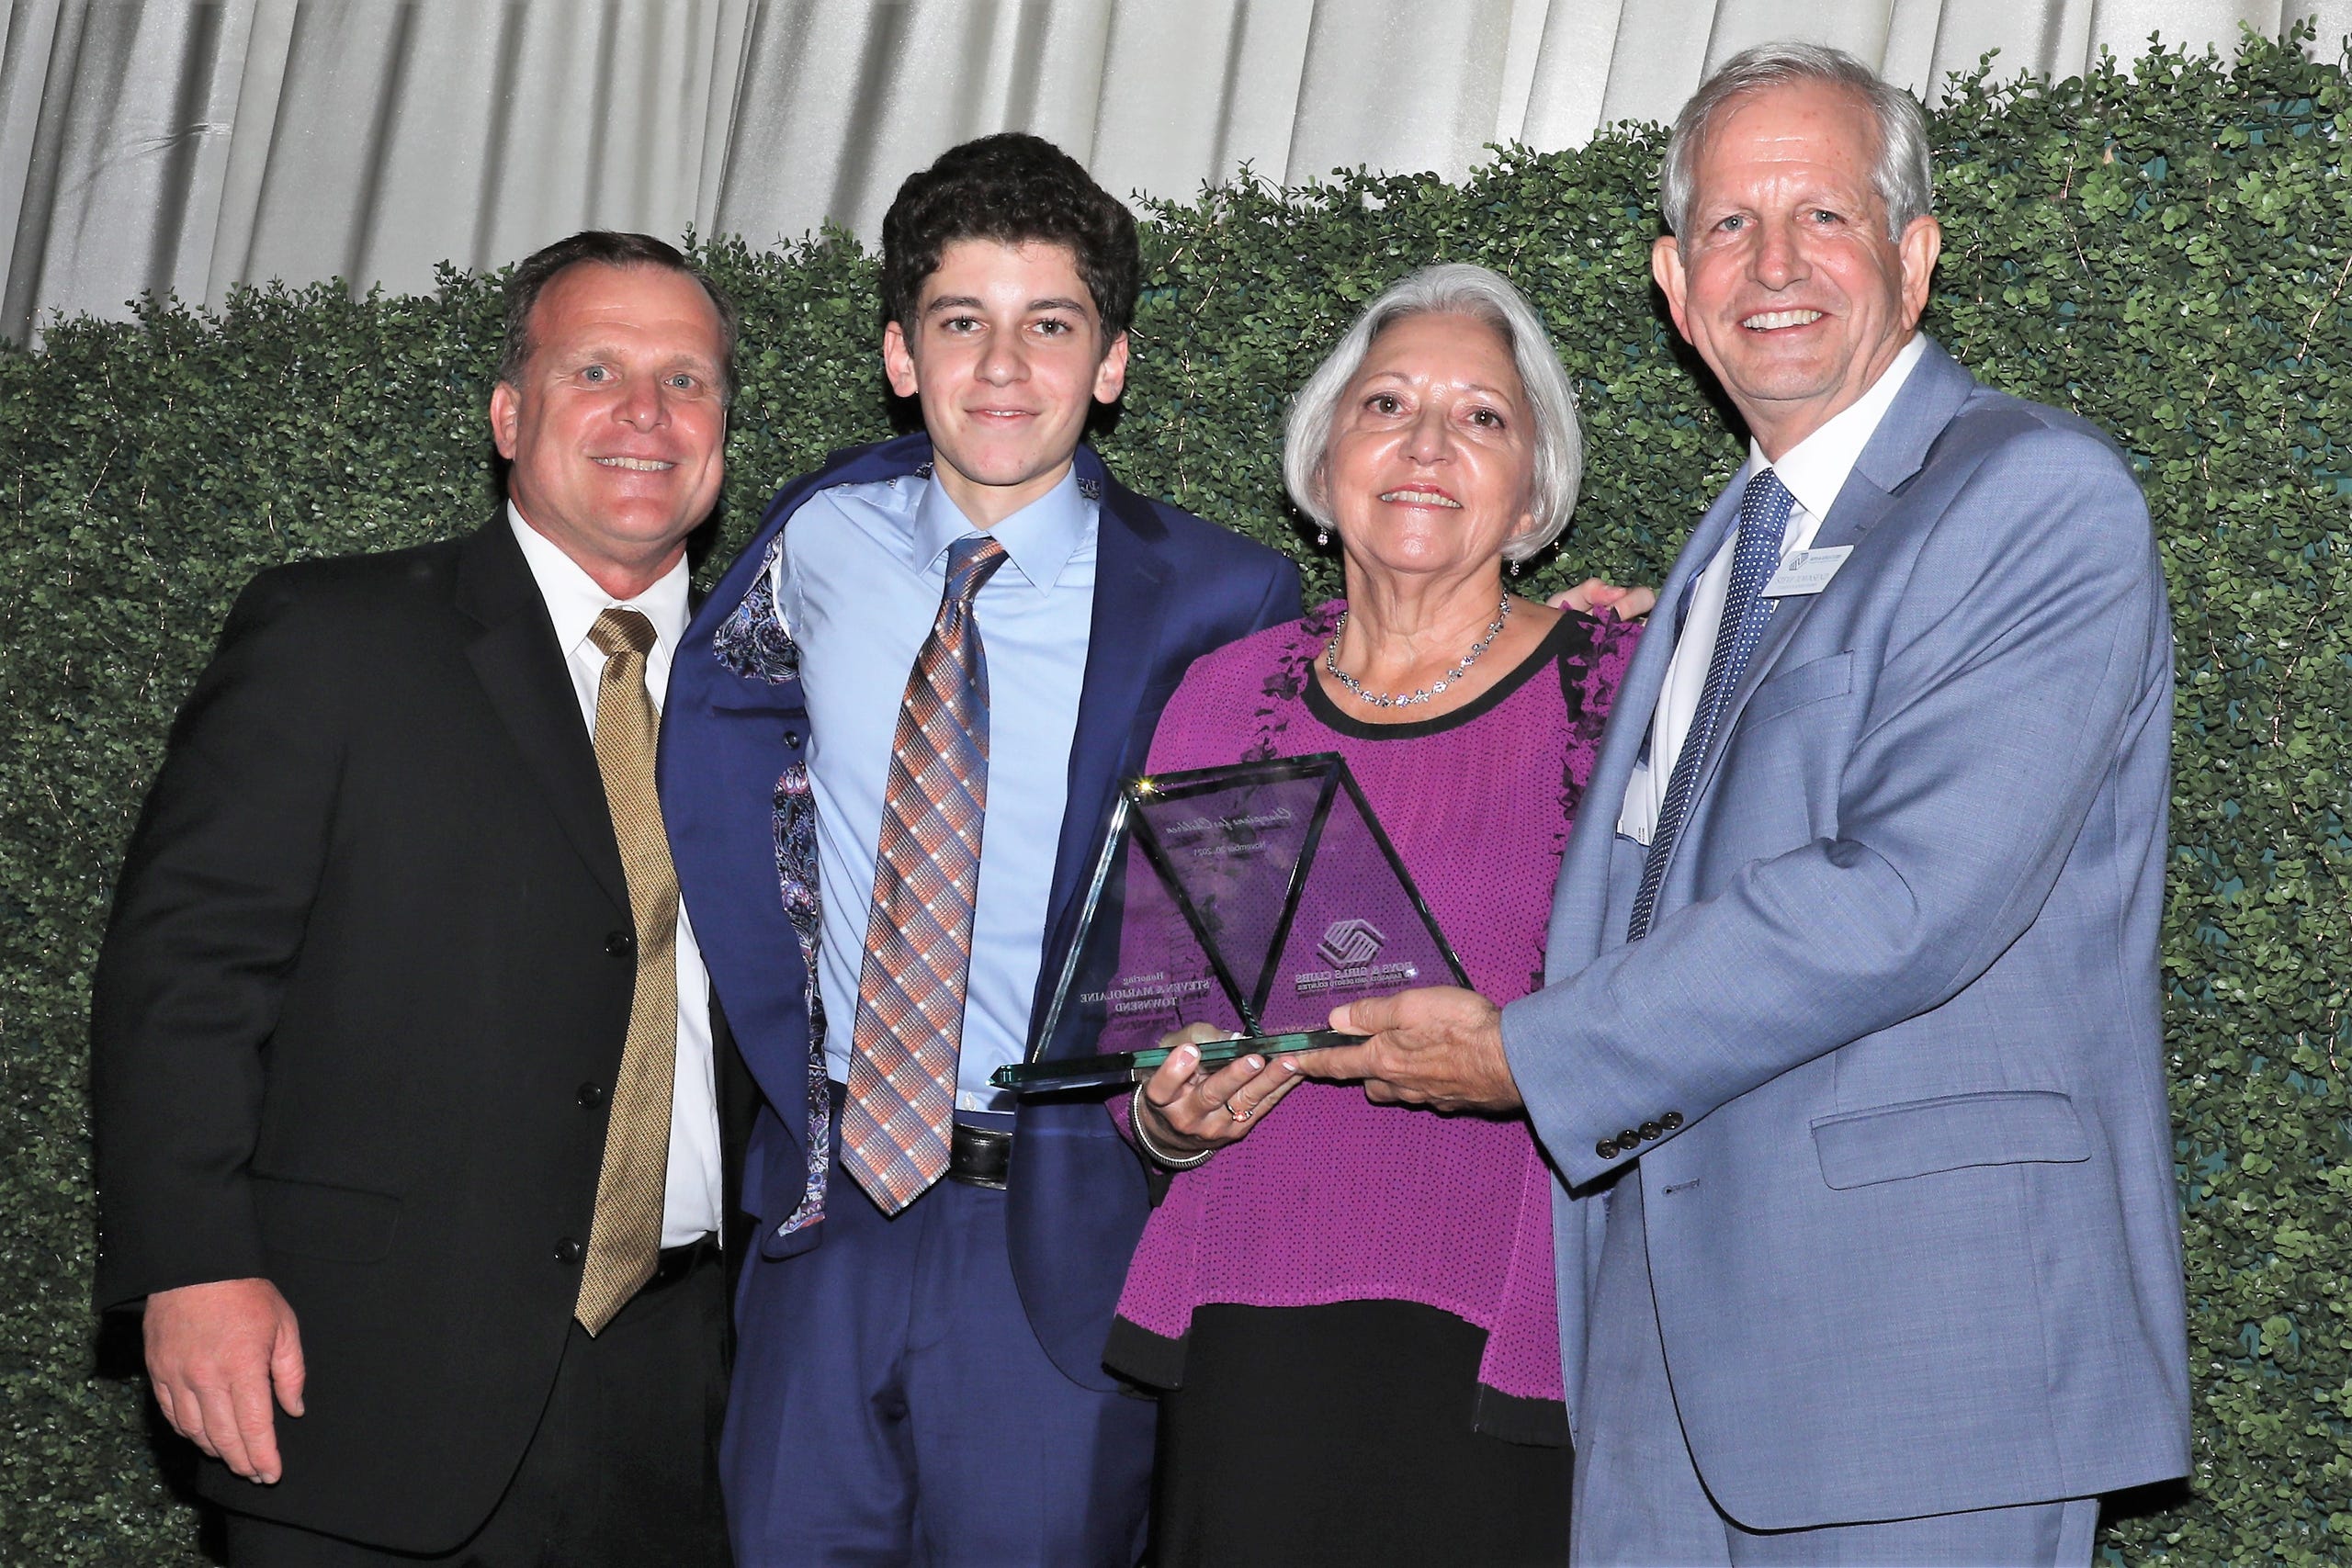 Board President/CEO Bill Sadlo (L), Youth of the Year and Emcee Jorge Hernandez-Perez, Marjolaine and Steven Townsend. Boys & Girls Clubs of Sarasota and DeSoto Counties held their Champions for Children Gala on November 20, 2021. Over 400 people came out to celebrate longtime supporters and donors Steven and Marjolaine Townsend who also have a scholarship fund in their name that has benefitted thirty-two college students since its inception in 2018. JANET COMBS/HERALD-TRIBUNE